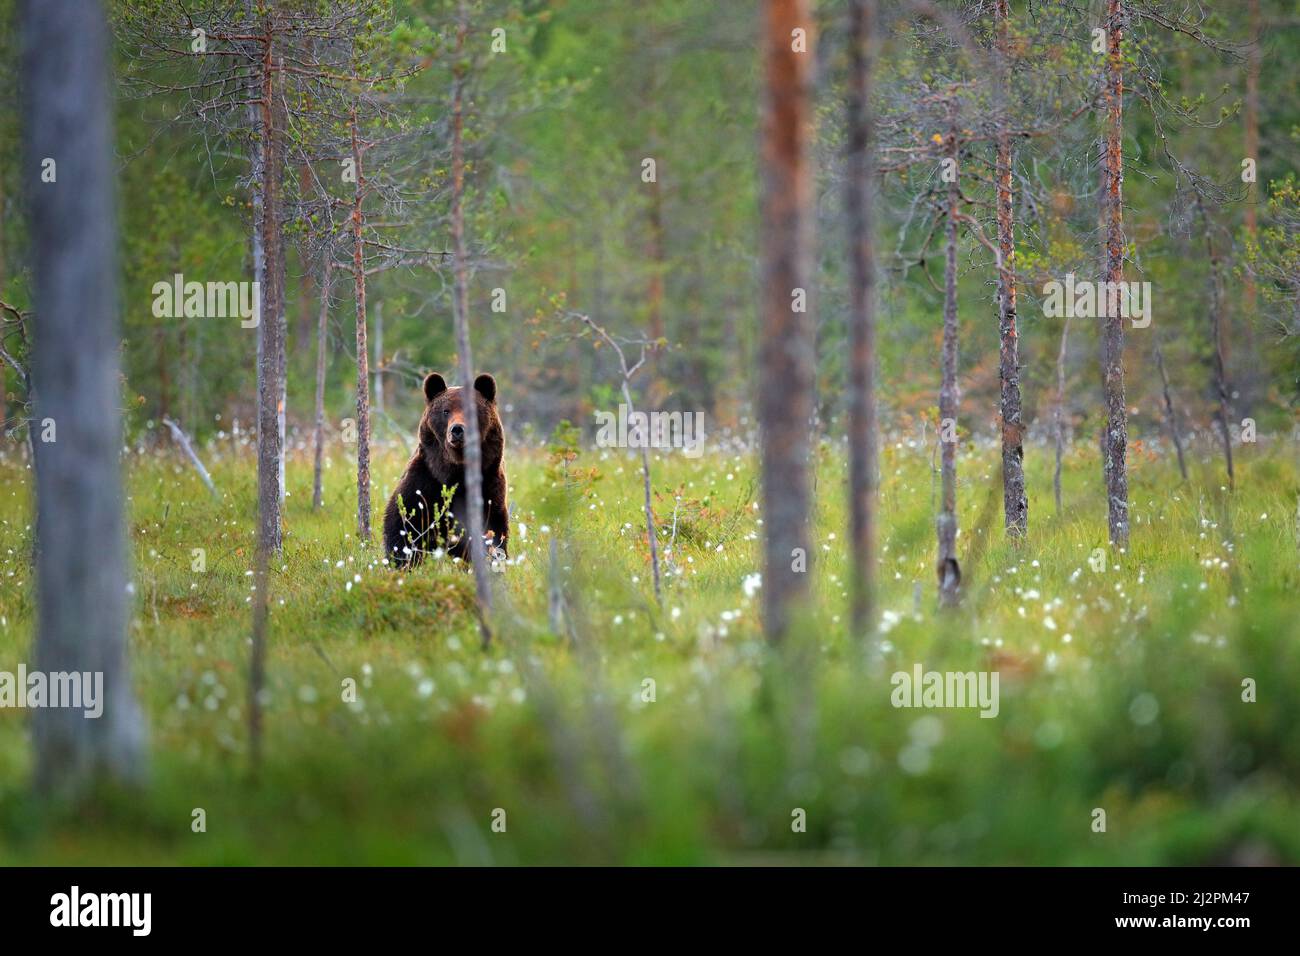 Bear standing,  sit up on its hind legs, somerr forest with cotton grass.  Dangerous animal in nature forest and meadow habitat. Wildlife scene from F Stock Photo